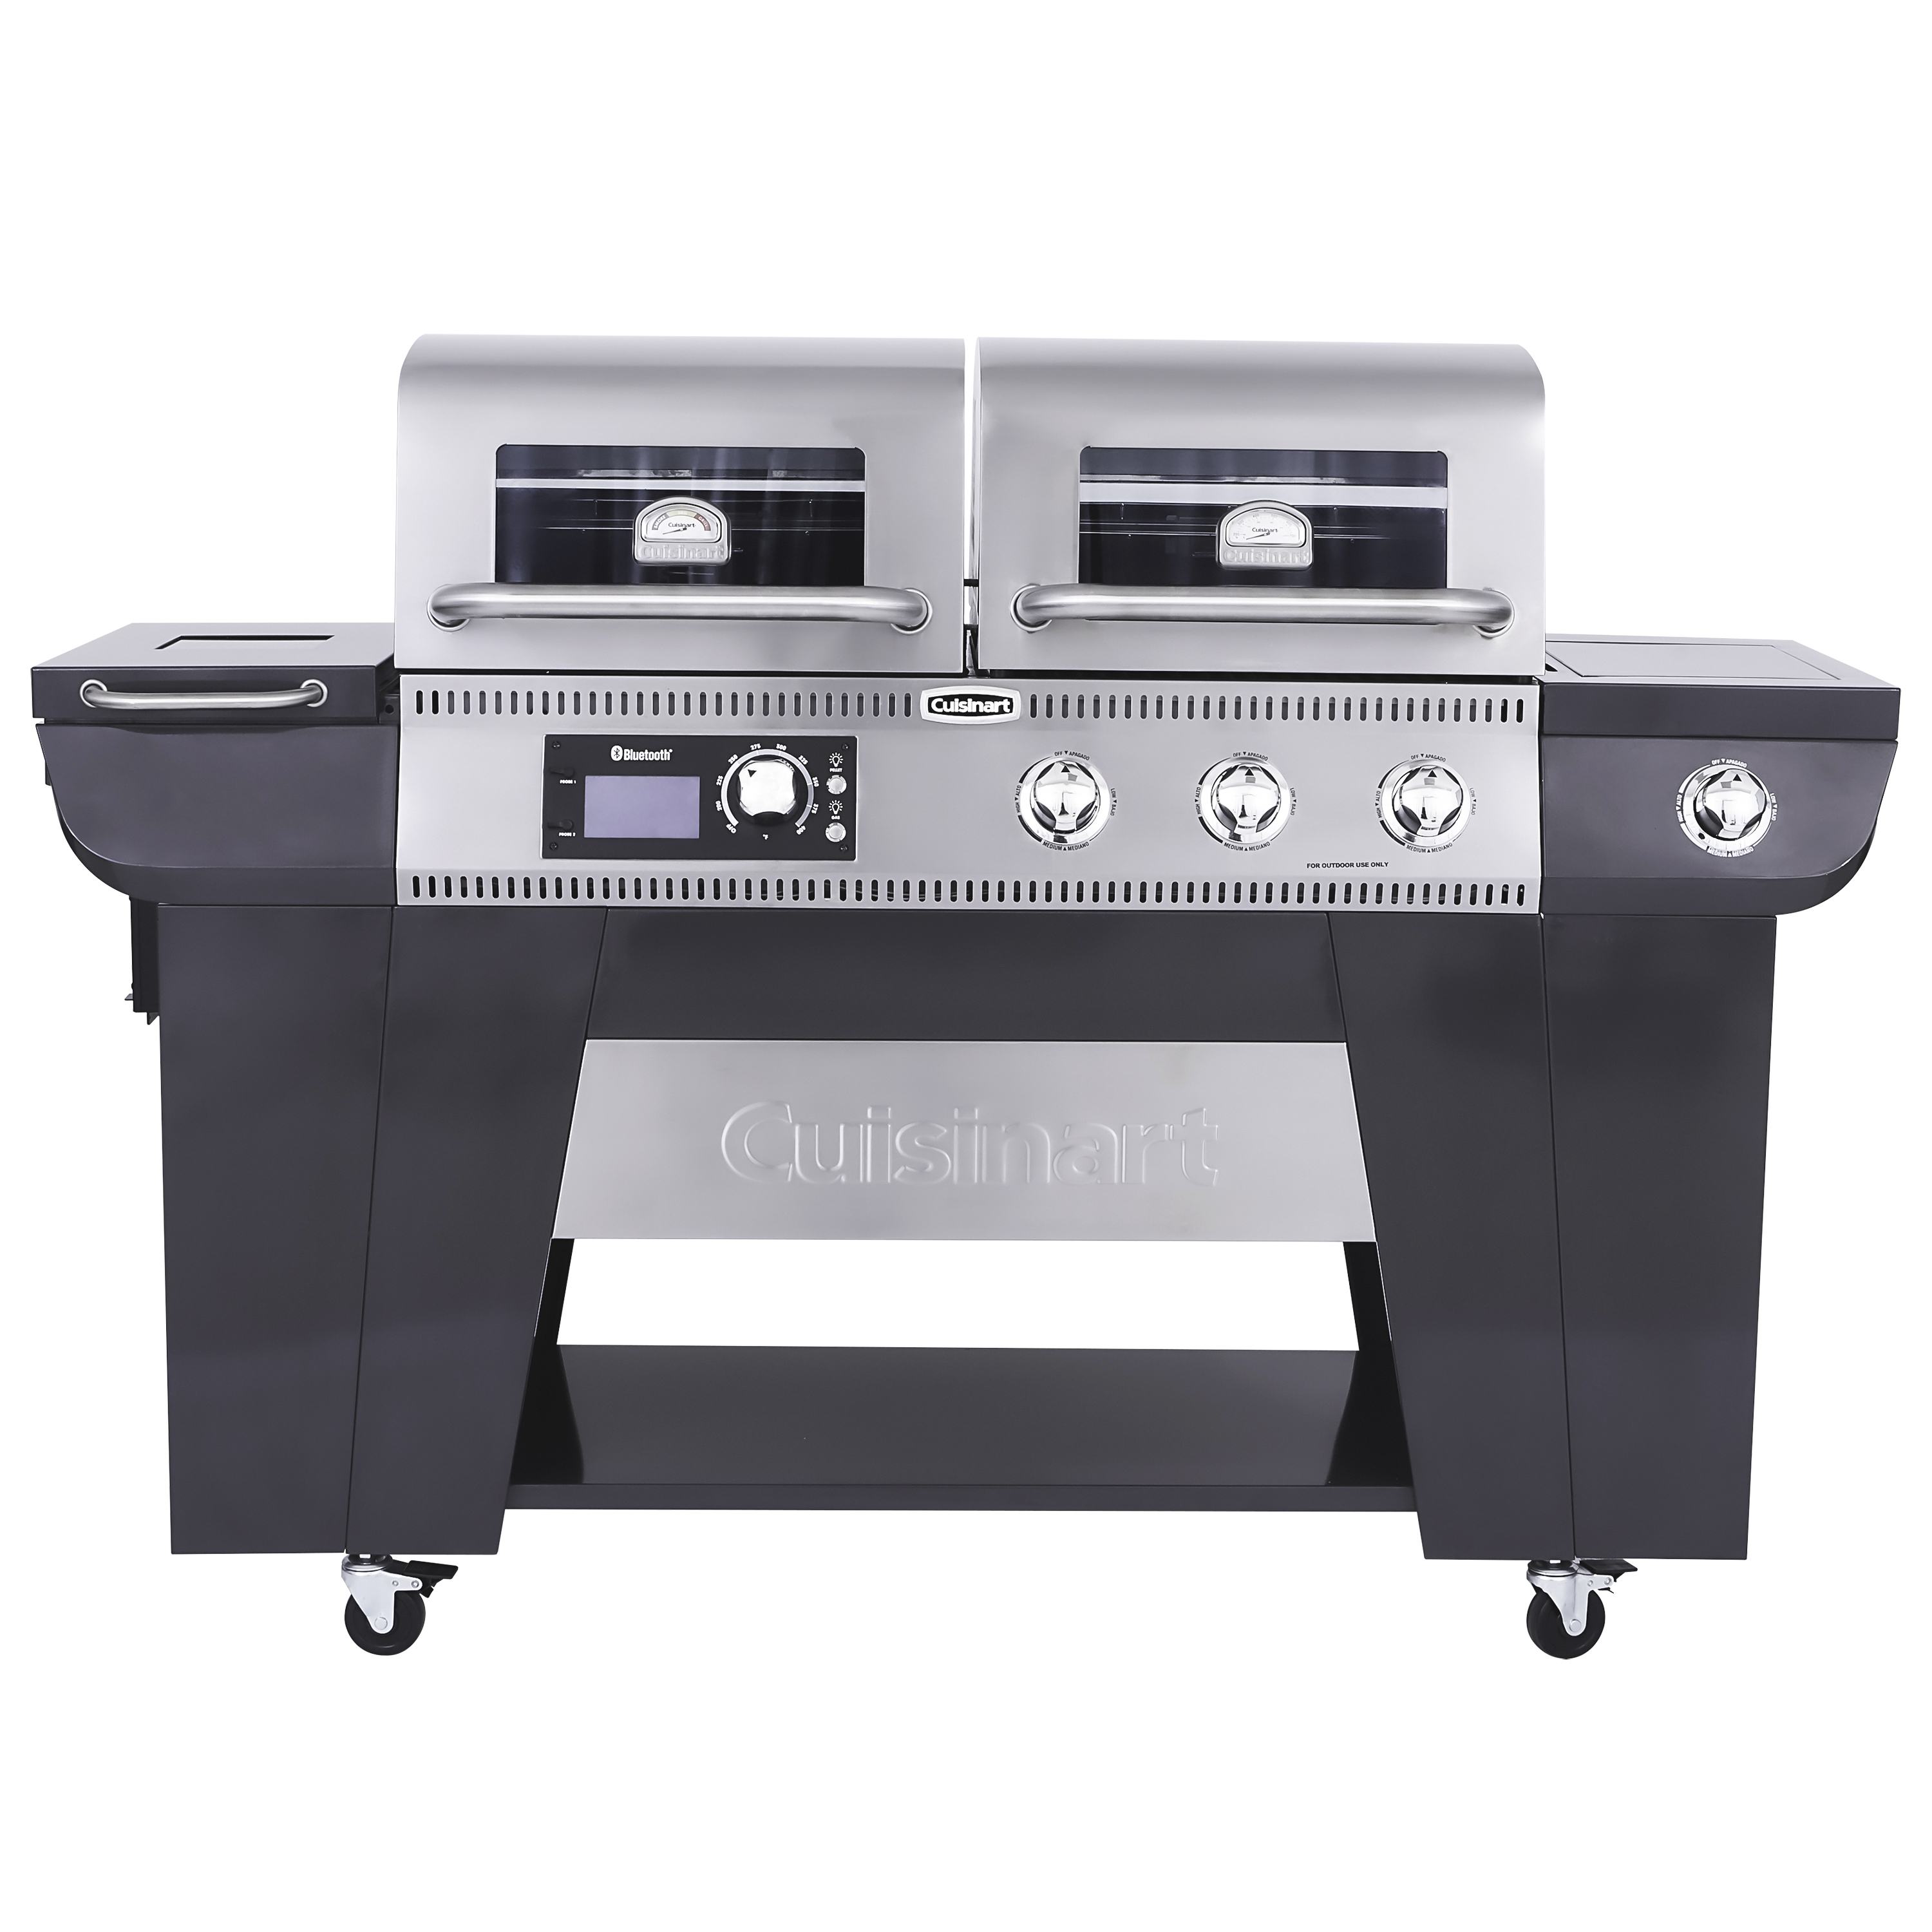 Cuisinart Twin Oaks Dual Function Pellet and Propane Gas Grill - image 1 of 30